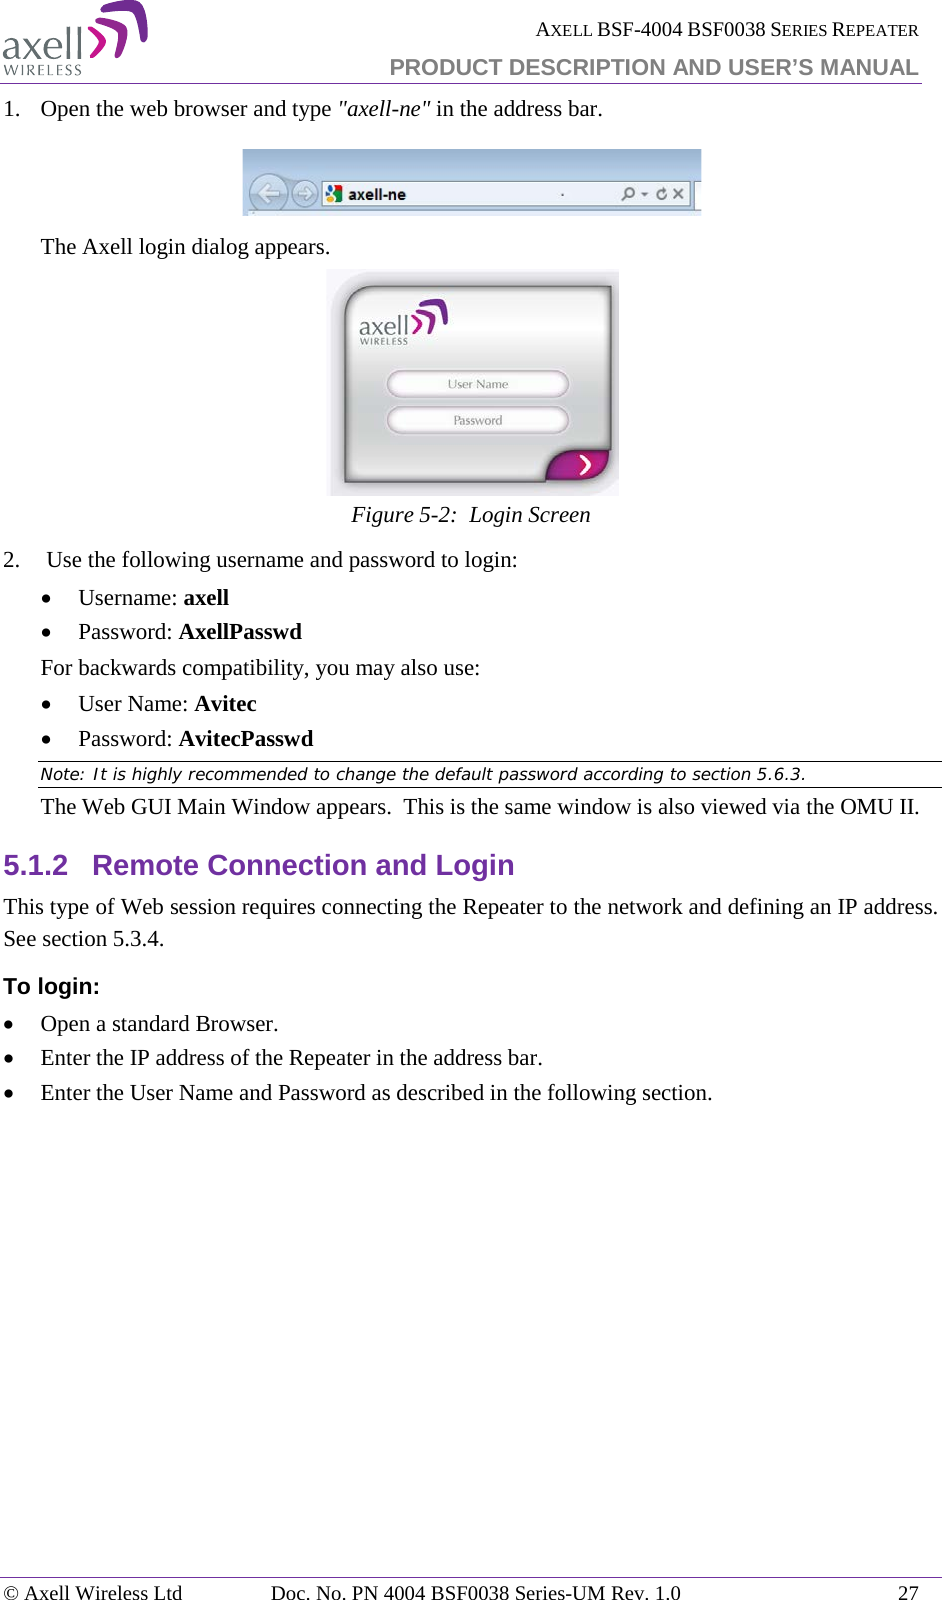  AXELL BSF-4004 BSF0038 SERIES REPEATER PRODUCT DESCRIPTION AND USER’S MANUAL  1.  Open the web browser and type &quot;axell-ne&quot; in the address bar.    The Axell login dialog appears.  Figure  5-2:  Login Screen 2.   Use the following username and password to login: • Username: axell • Password: AxellPasswd For backwards compatibility, you may also use: • User Name: Avitec • Password: AvitecPasswd Note: It is highly recommended to change the default password according to section  5.6.3. The Web GUI Main Window appears.  This is the same window is also viewed via the OMU II. 5.1.2 Remote Connection and Login This type of Web session requires connecting the Repeater to the network and defining an IP address. See section  5.3.4. To login: • Open a standard Browser. • Enter the IP address of the Repeater in the address bar. • Enter the User Name and Password as described in the following section.      © Axell Wireless Ltd Doc. No. PN 4004 BSF0038 Series-UM Rev. 1.0 27 